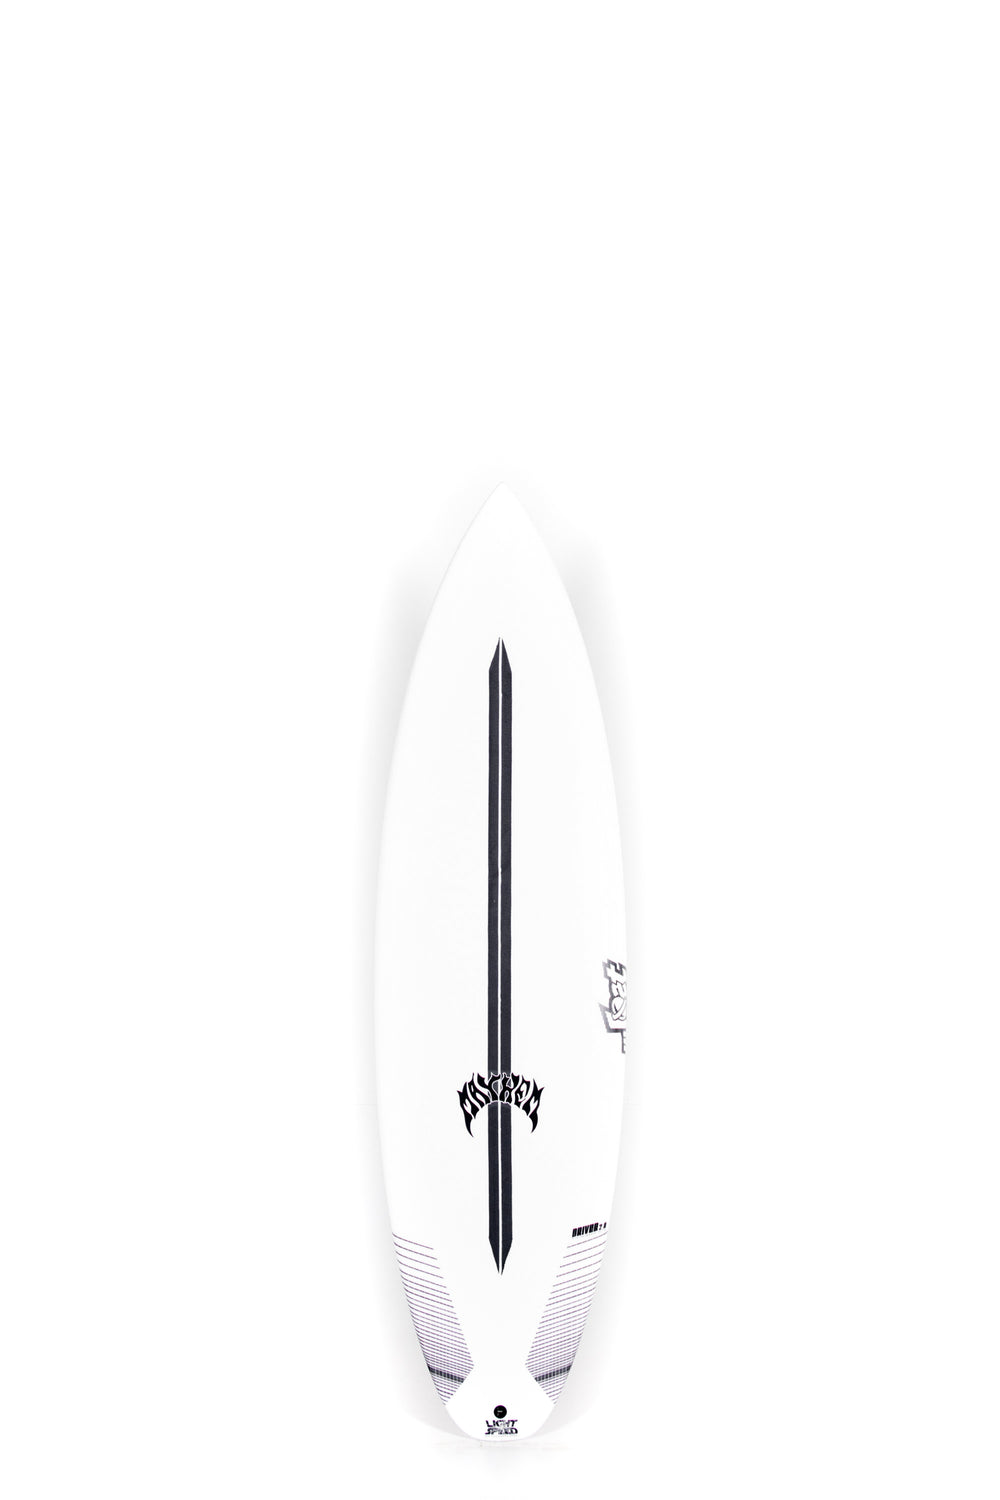 Pukas-Surf-Shop-Lost-Surfboards-Driver-20-6_1_-MH12365